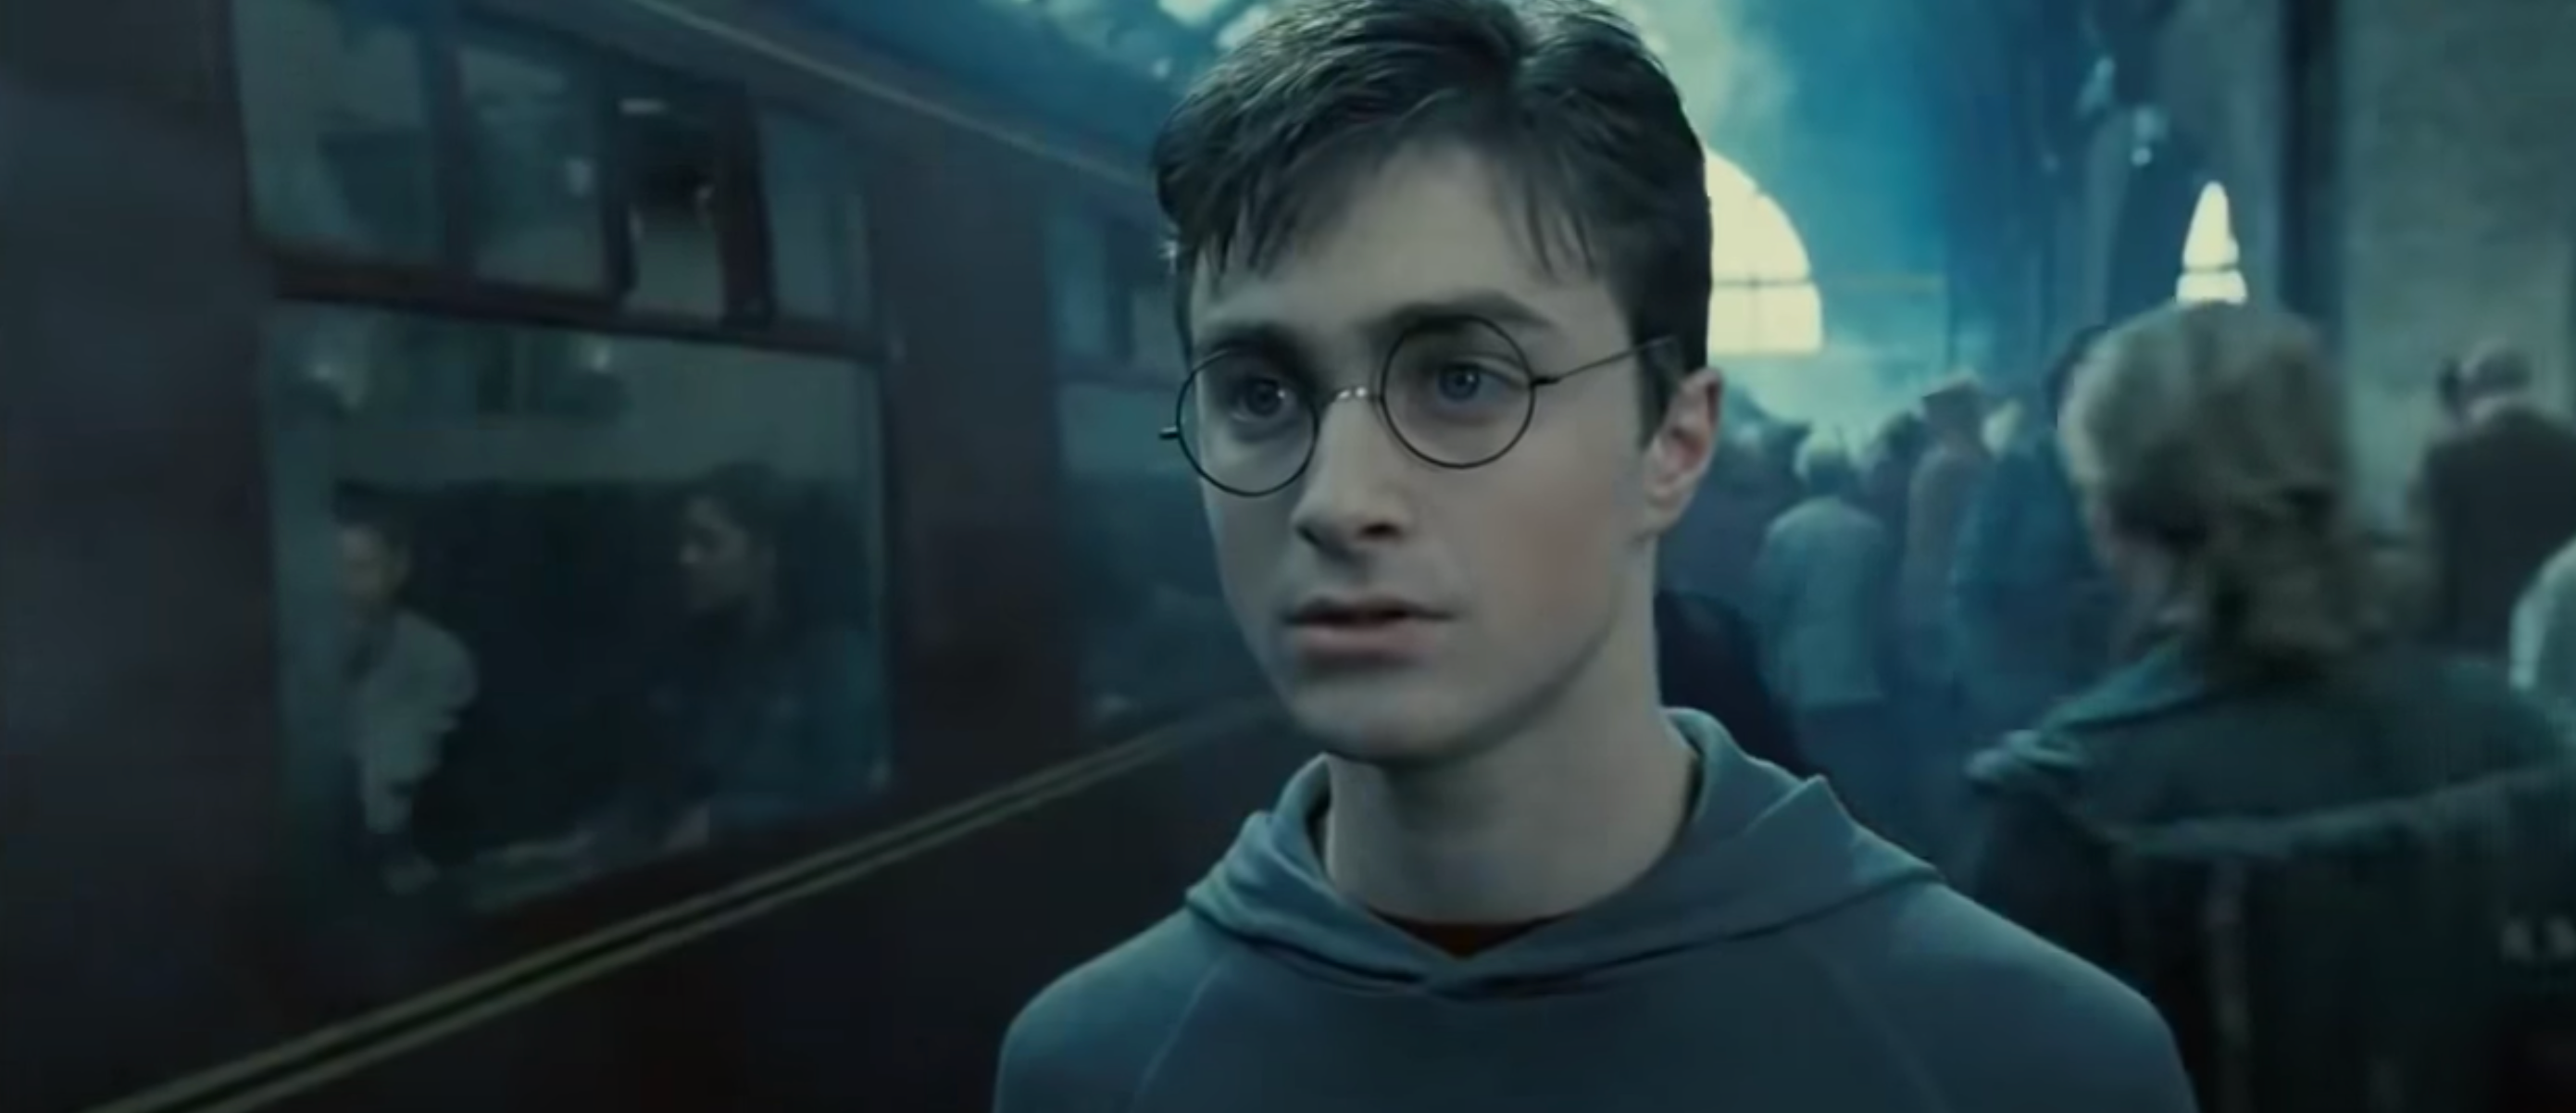 Are the Harry Potter movies available on Disney+?